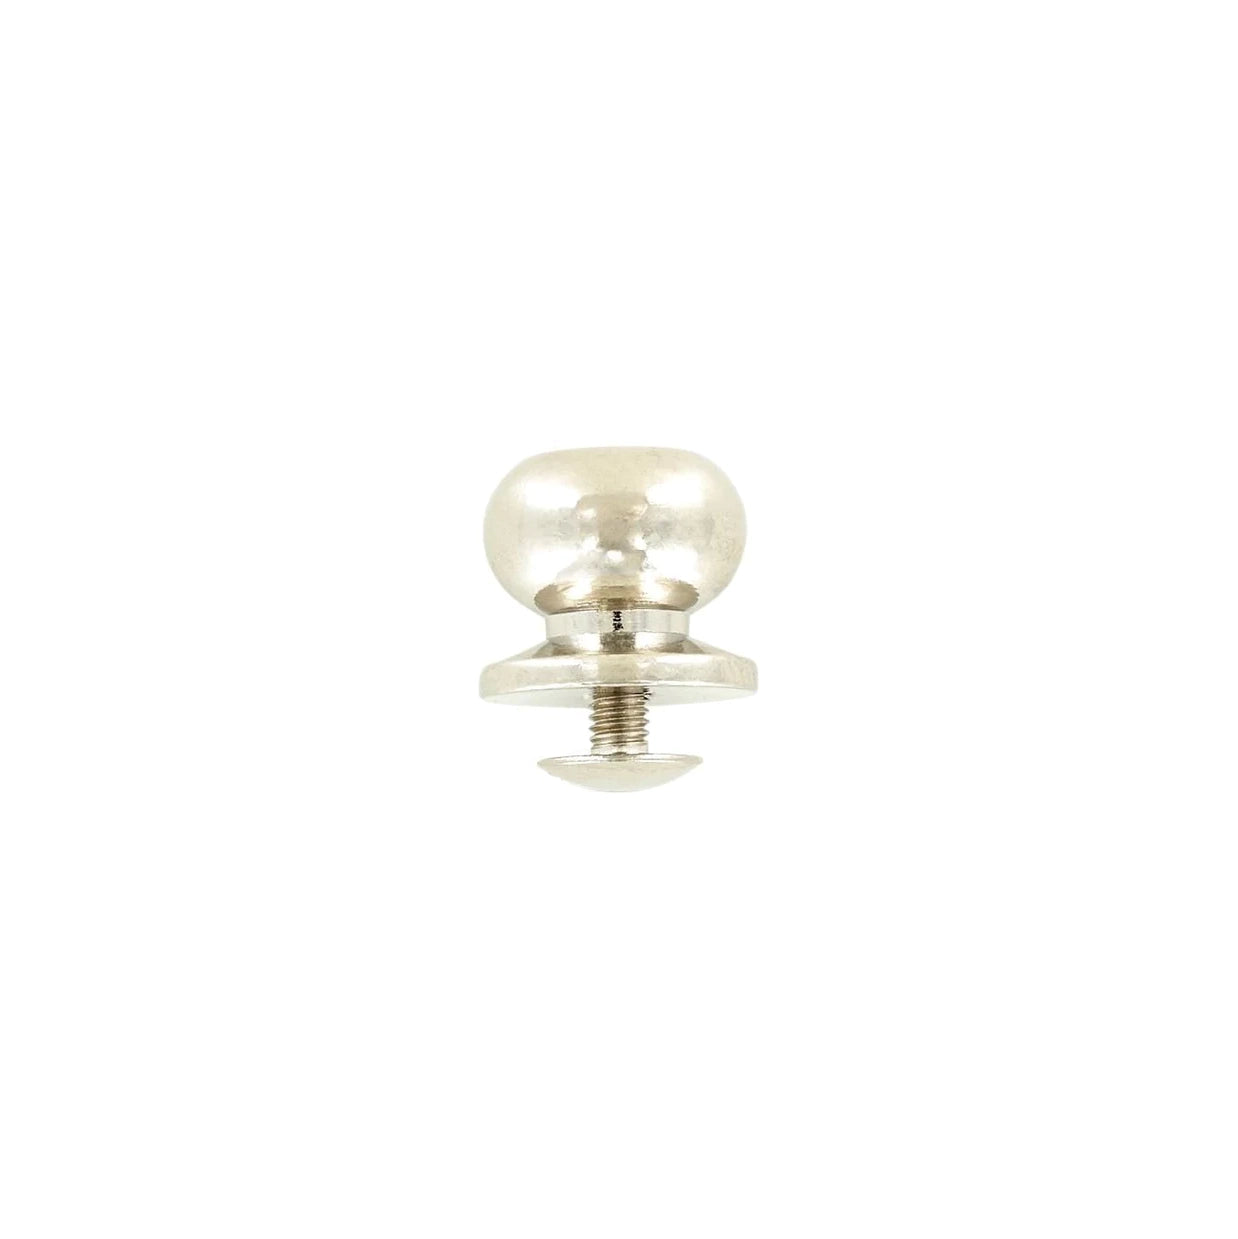 13mm, Nickel, Tapered Collar Button Stud with Screw, Solid Brass, #P-2392-SBN